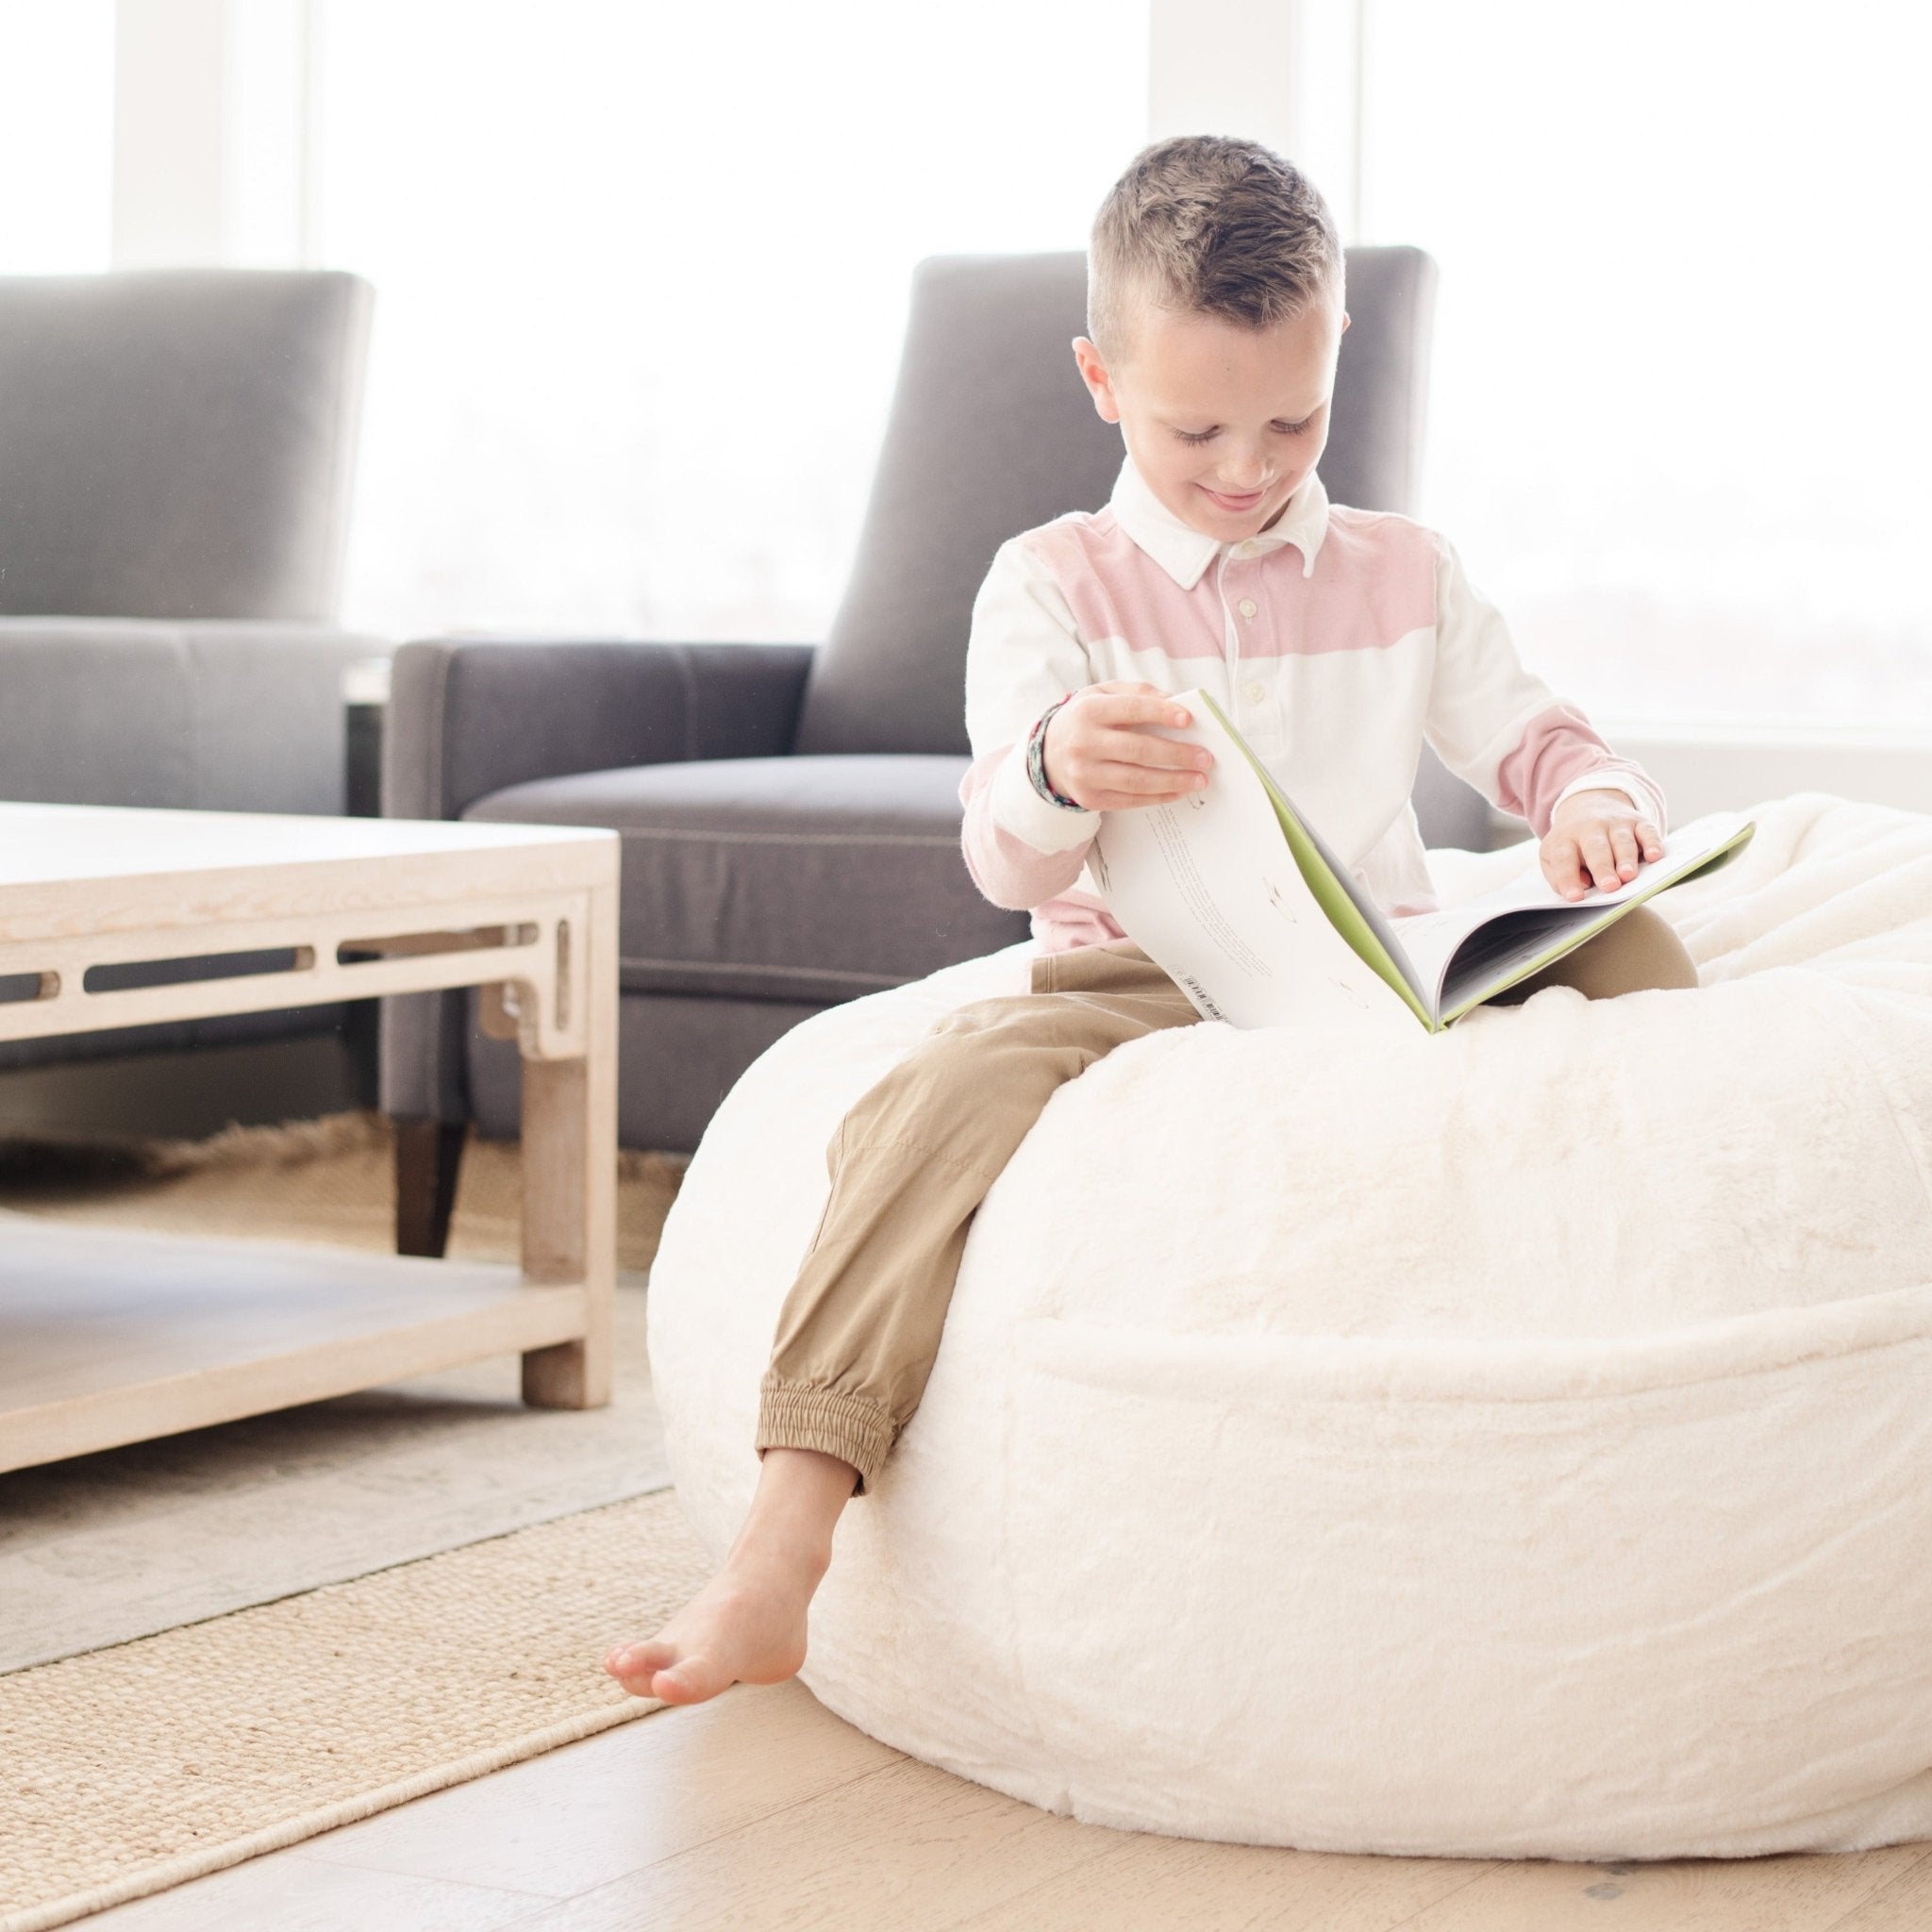 Five Reasons For Buying That Bean Bag Chair You've Always Wanted